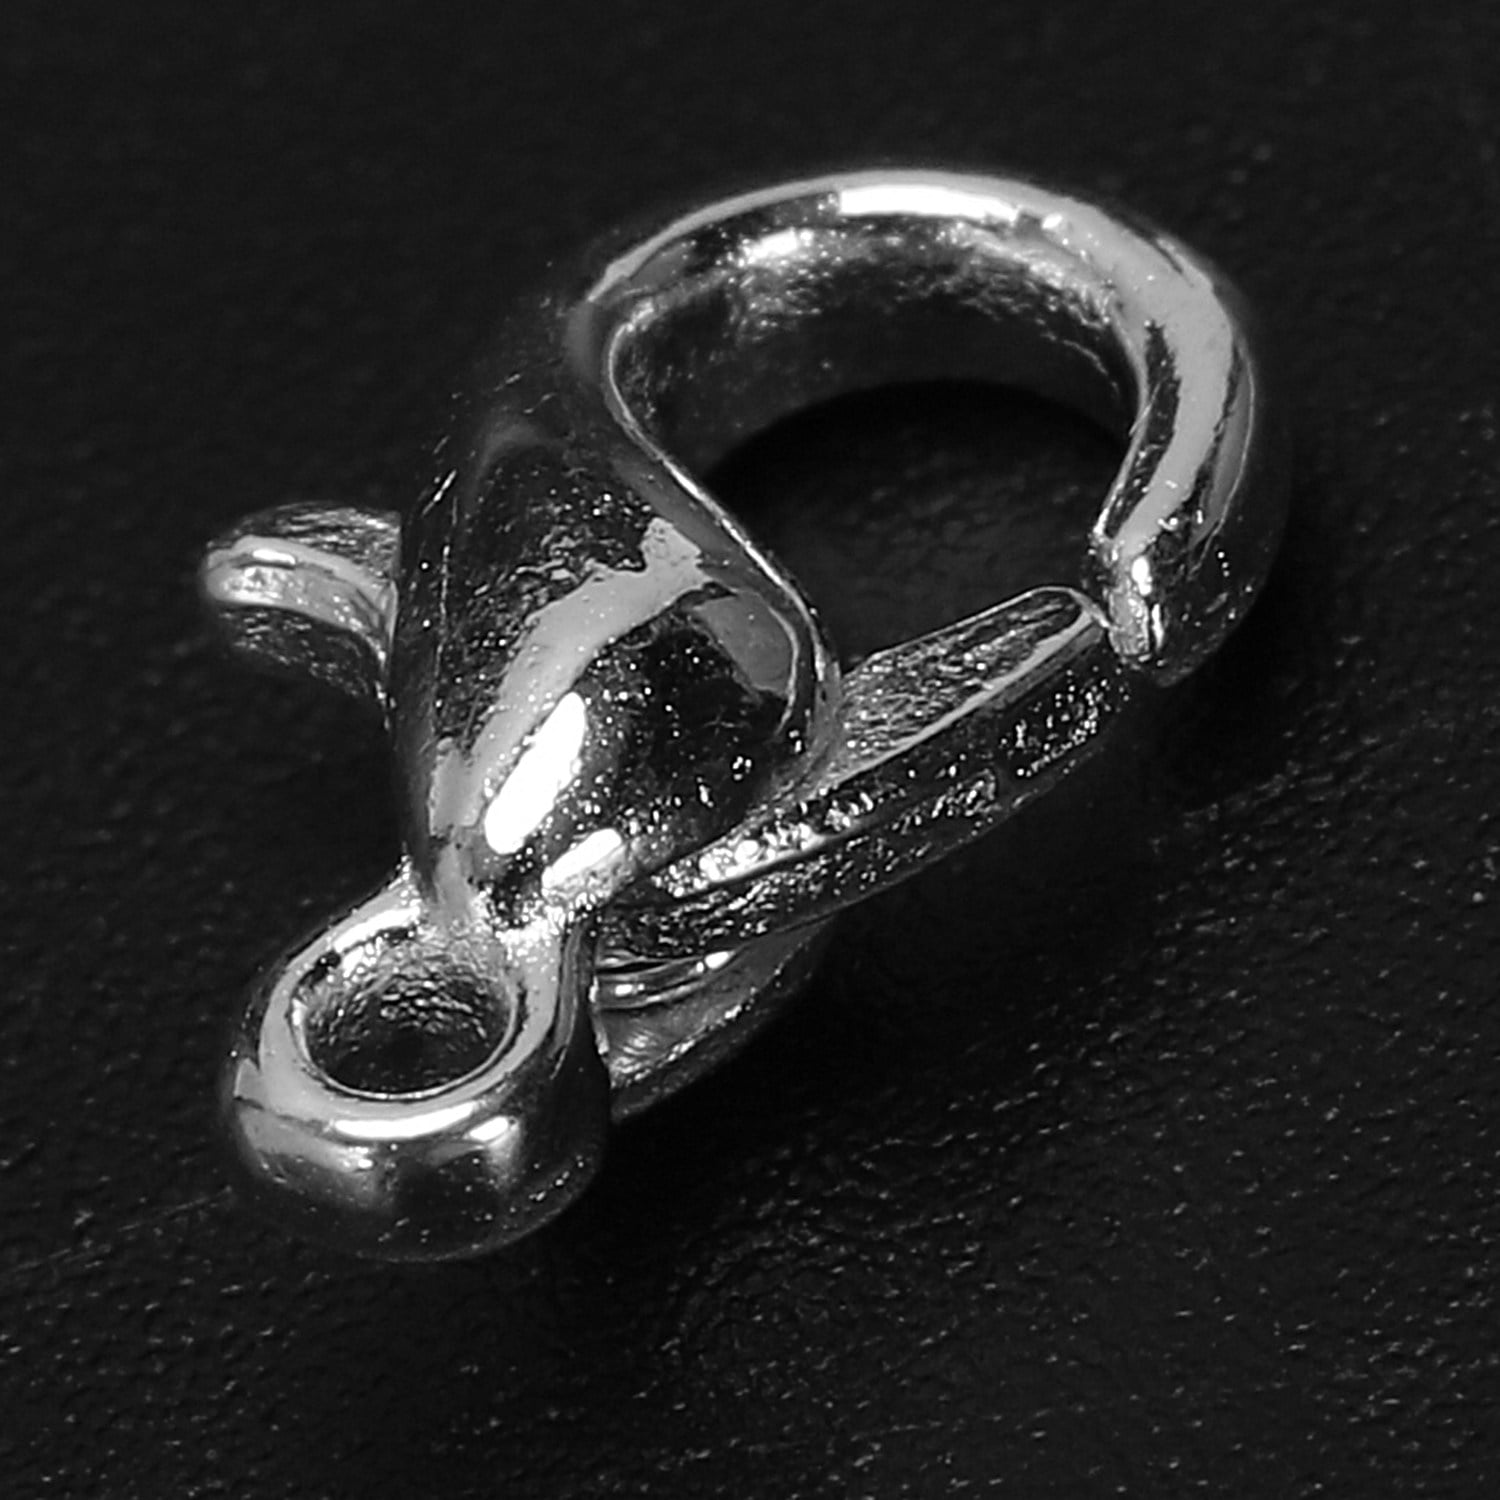 Silver Plated Lobster Clasps 10x6mm